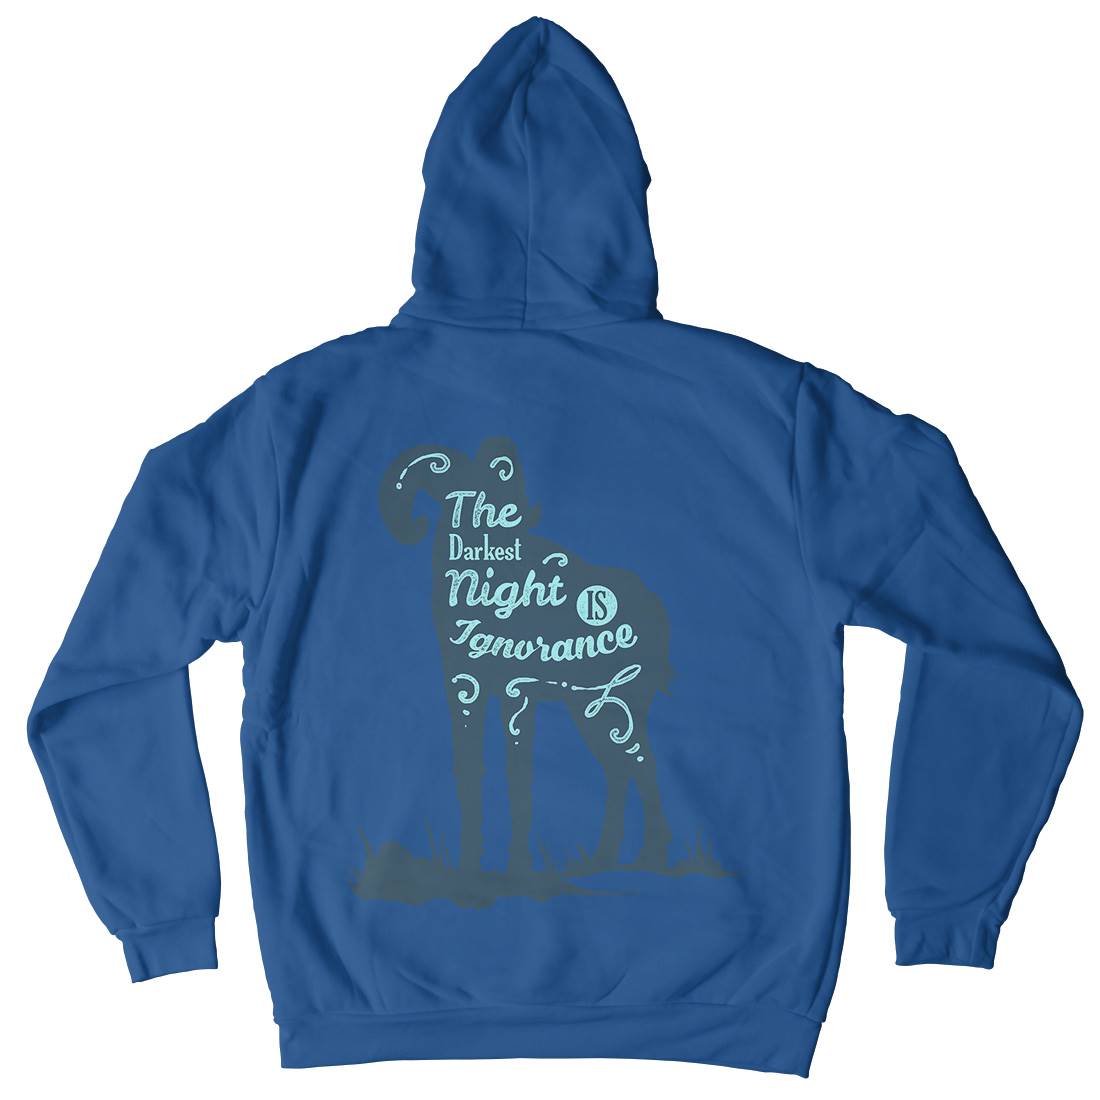 Darkest Night Mens Hoodie With Pocket Quotes A377